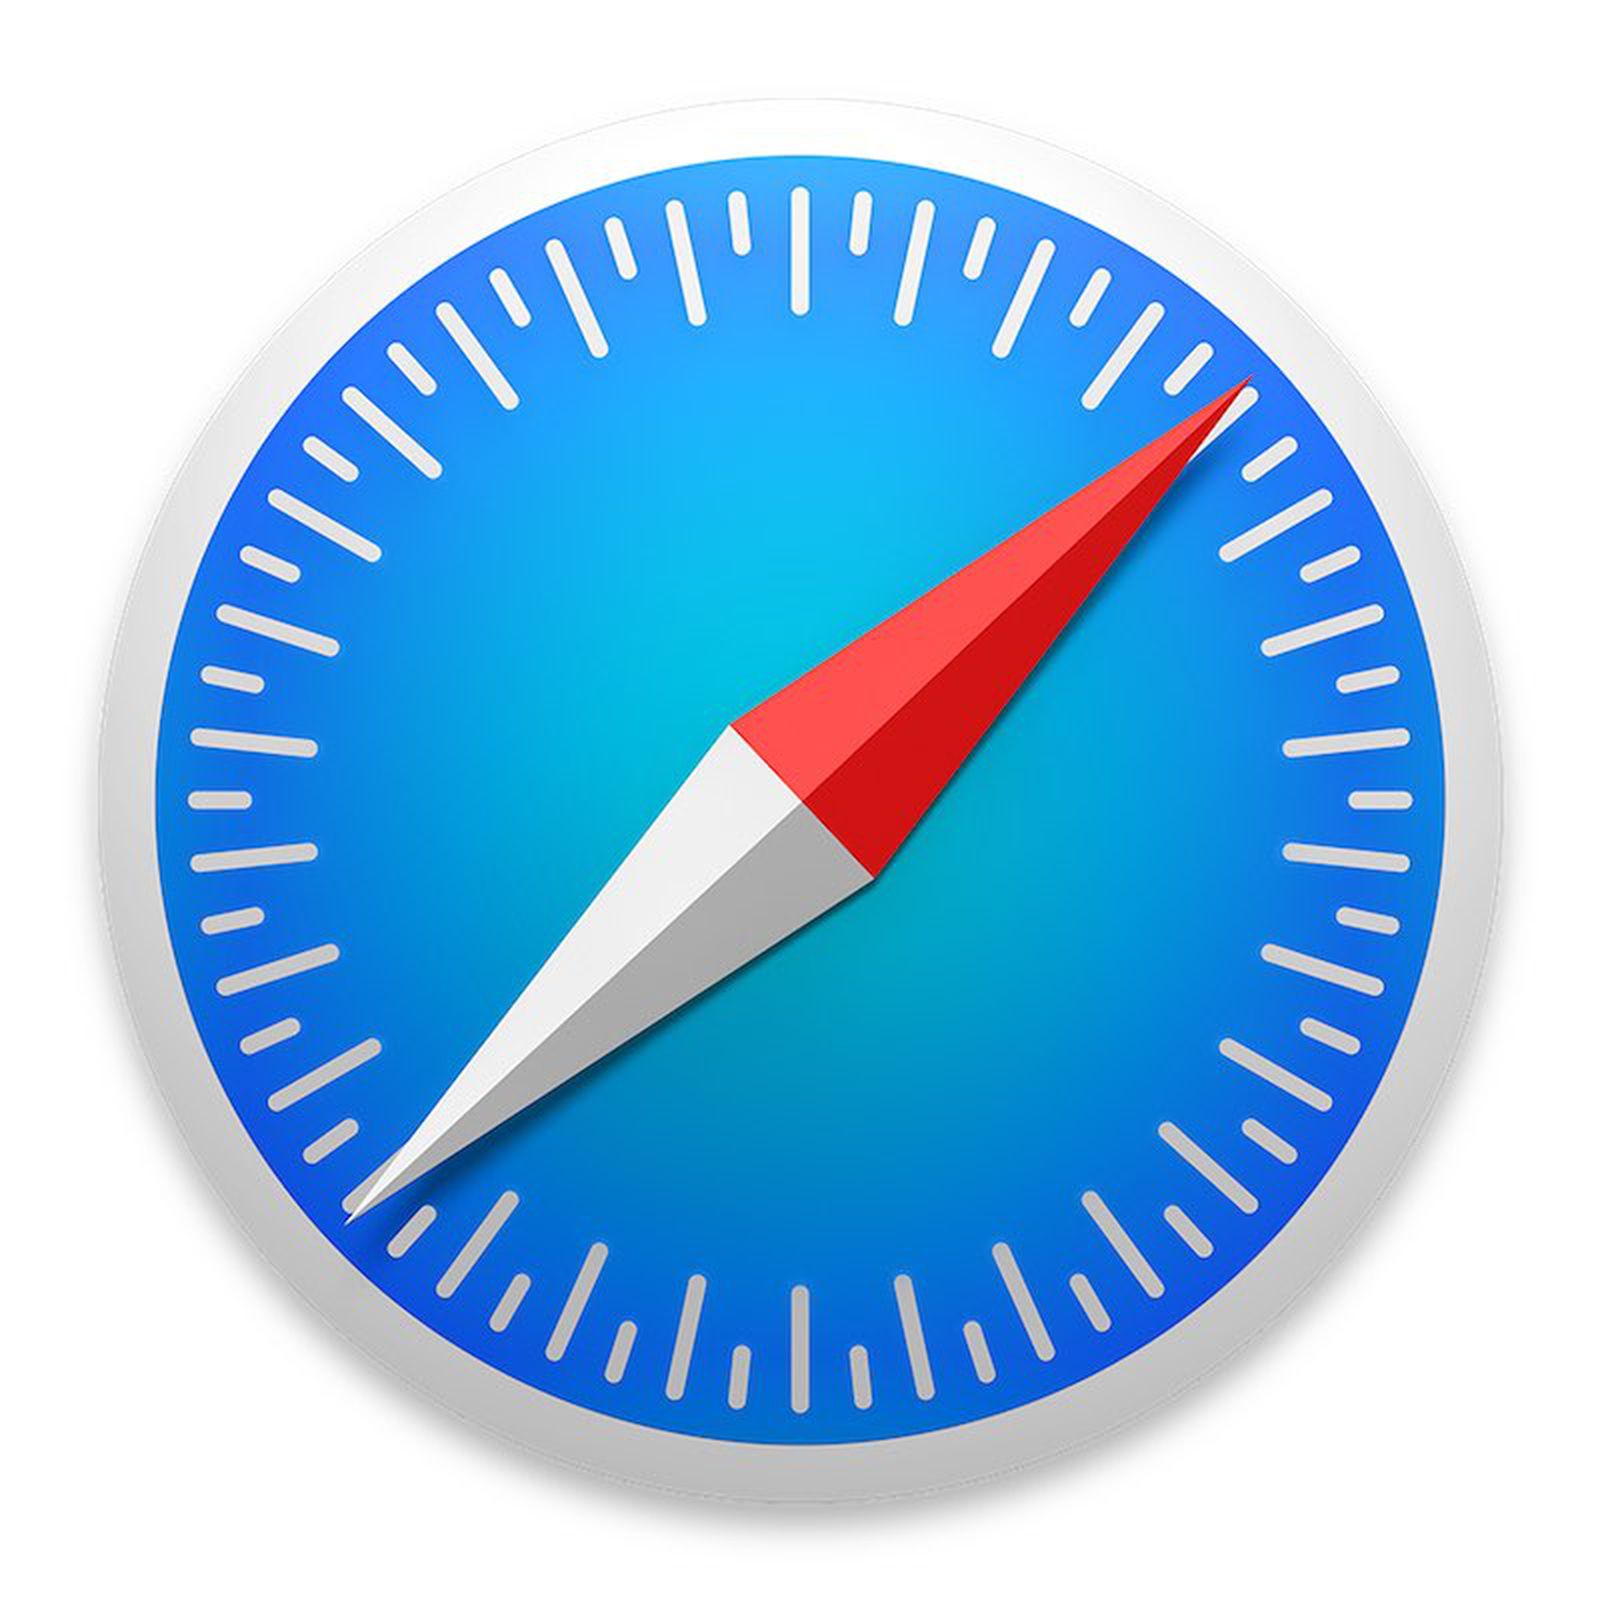 How to Make Web Pages in Safari for Mac Easier to Read - MacRumors